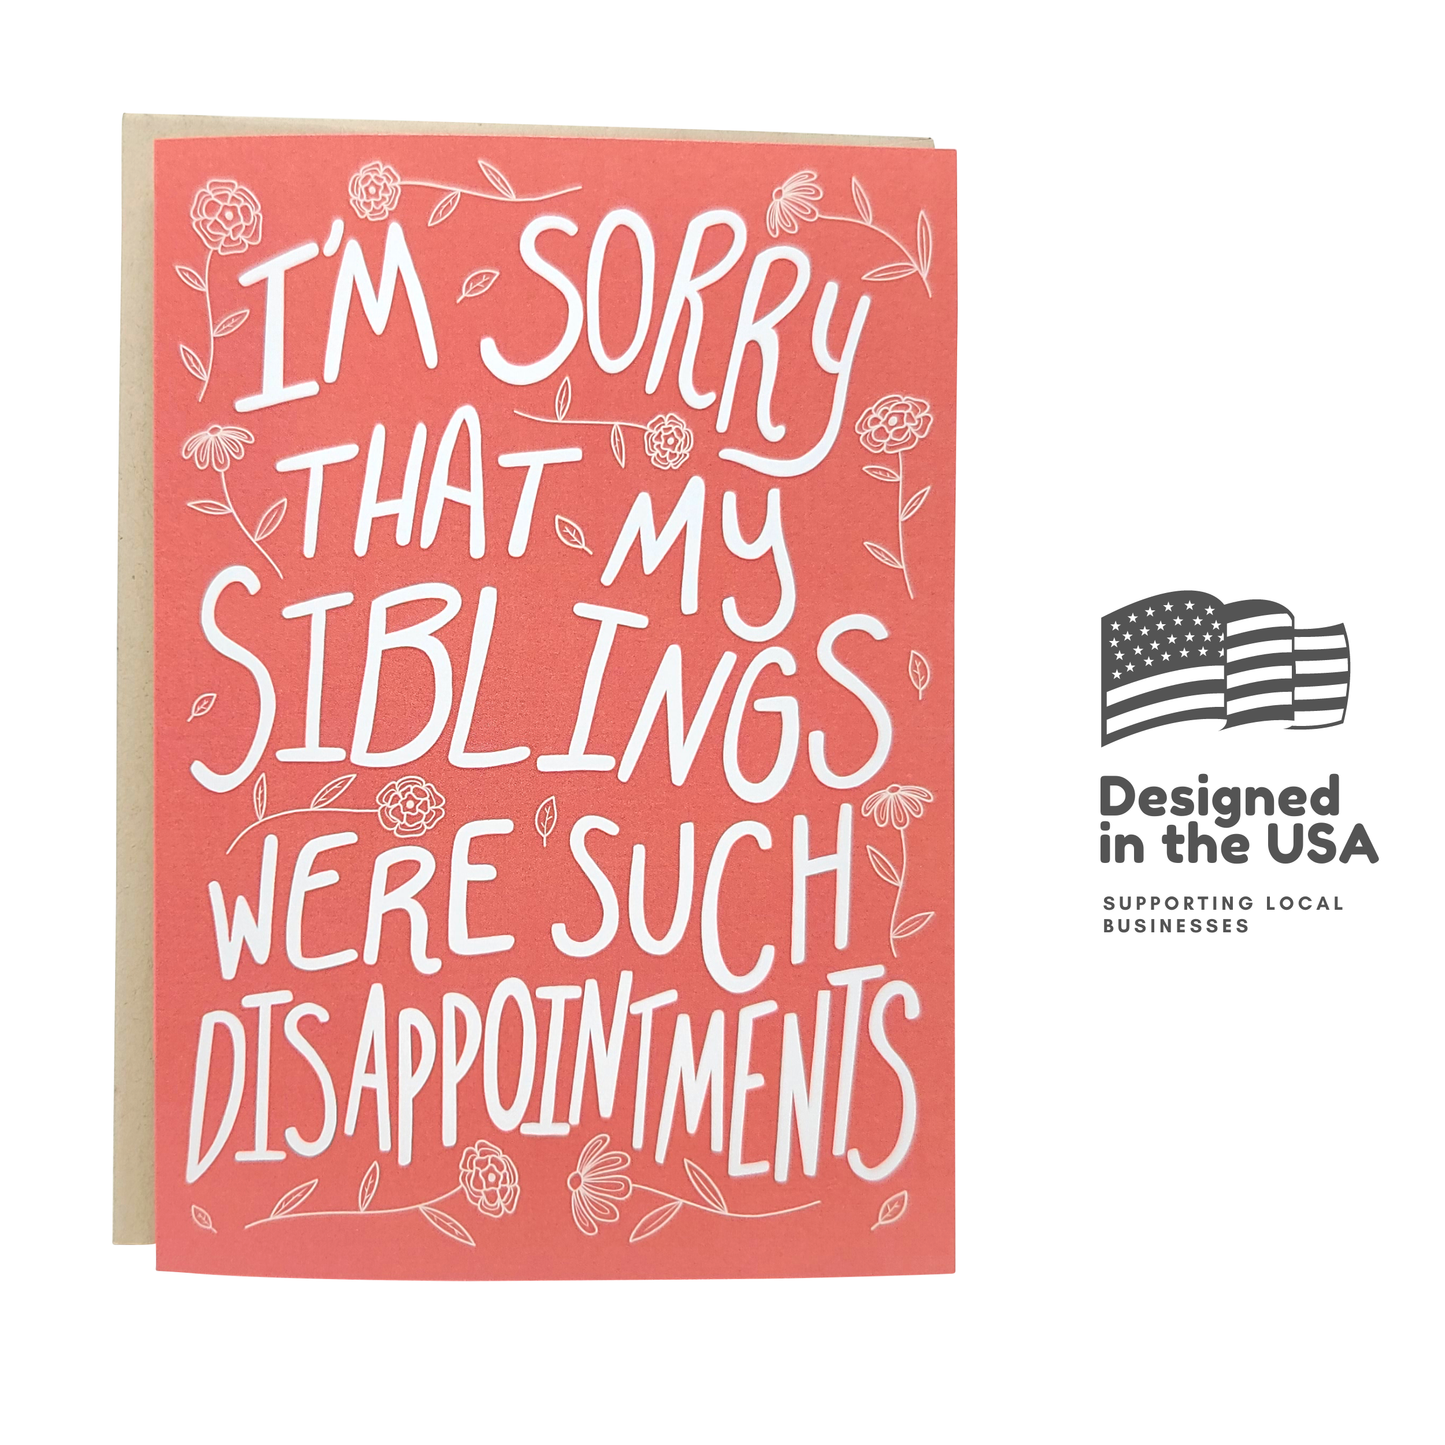 Greeting Card: Siblings Were Such Disappointments